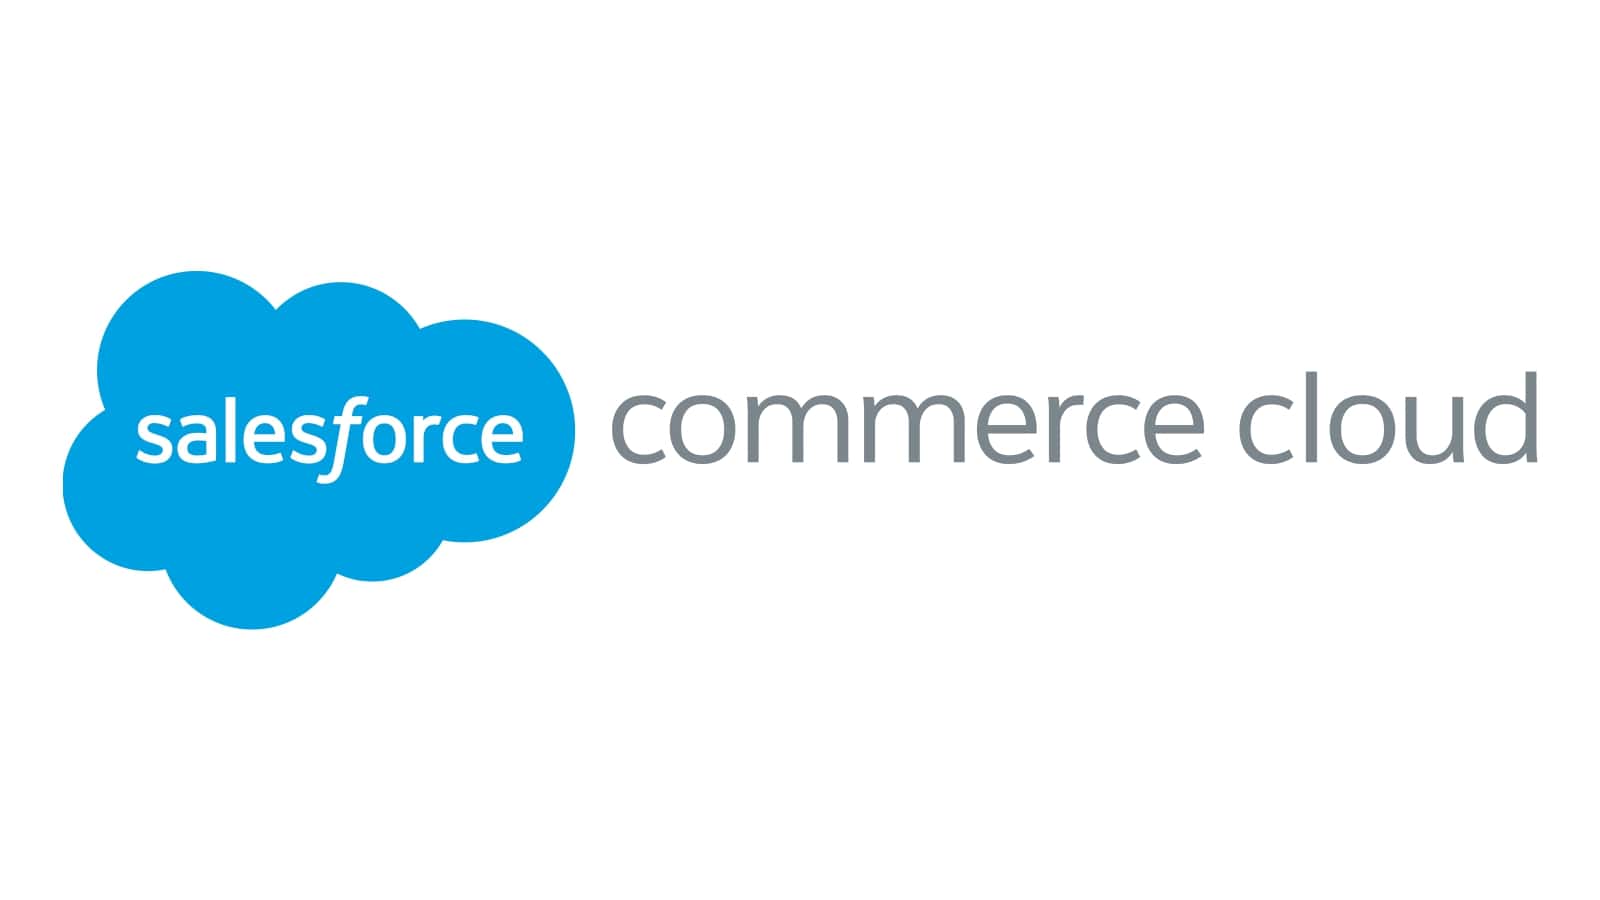 Salesforce Commerce Cloud can serve both B2C and B2B businesses